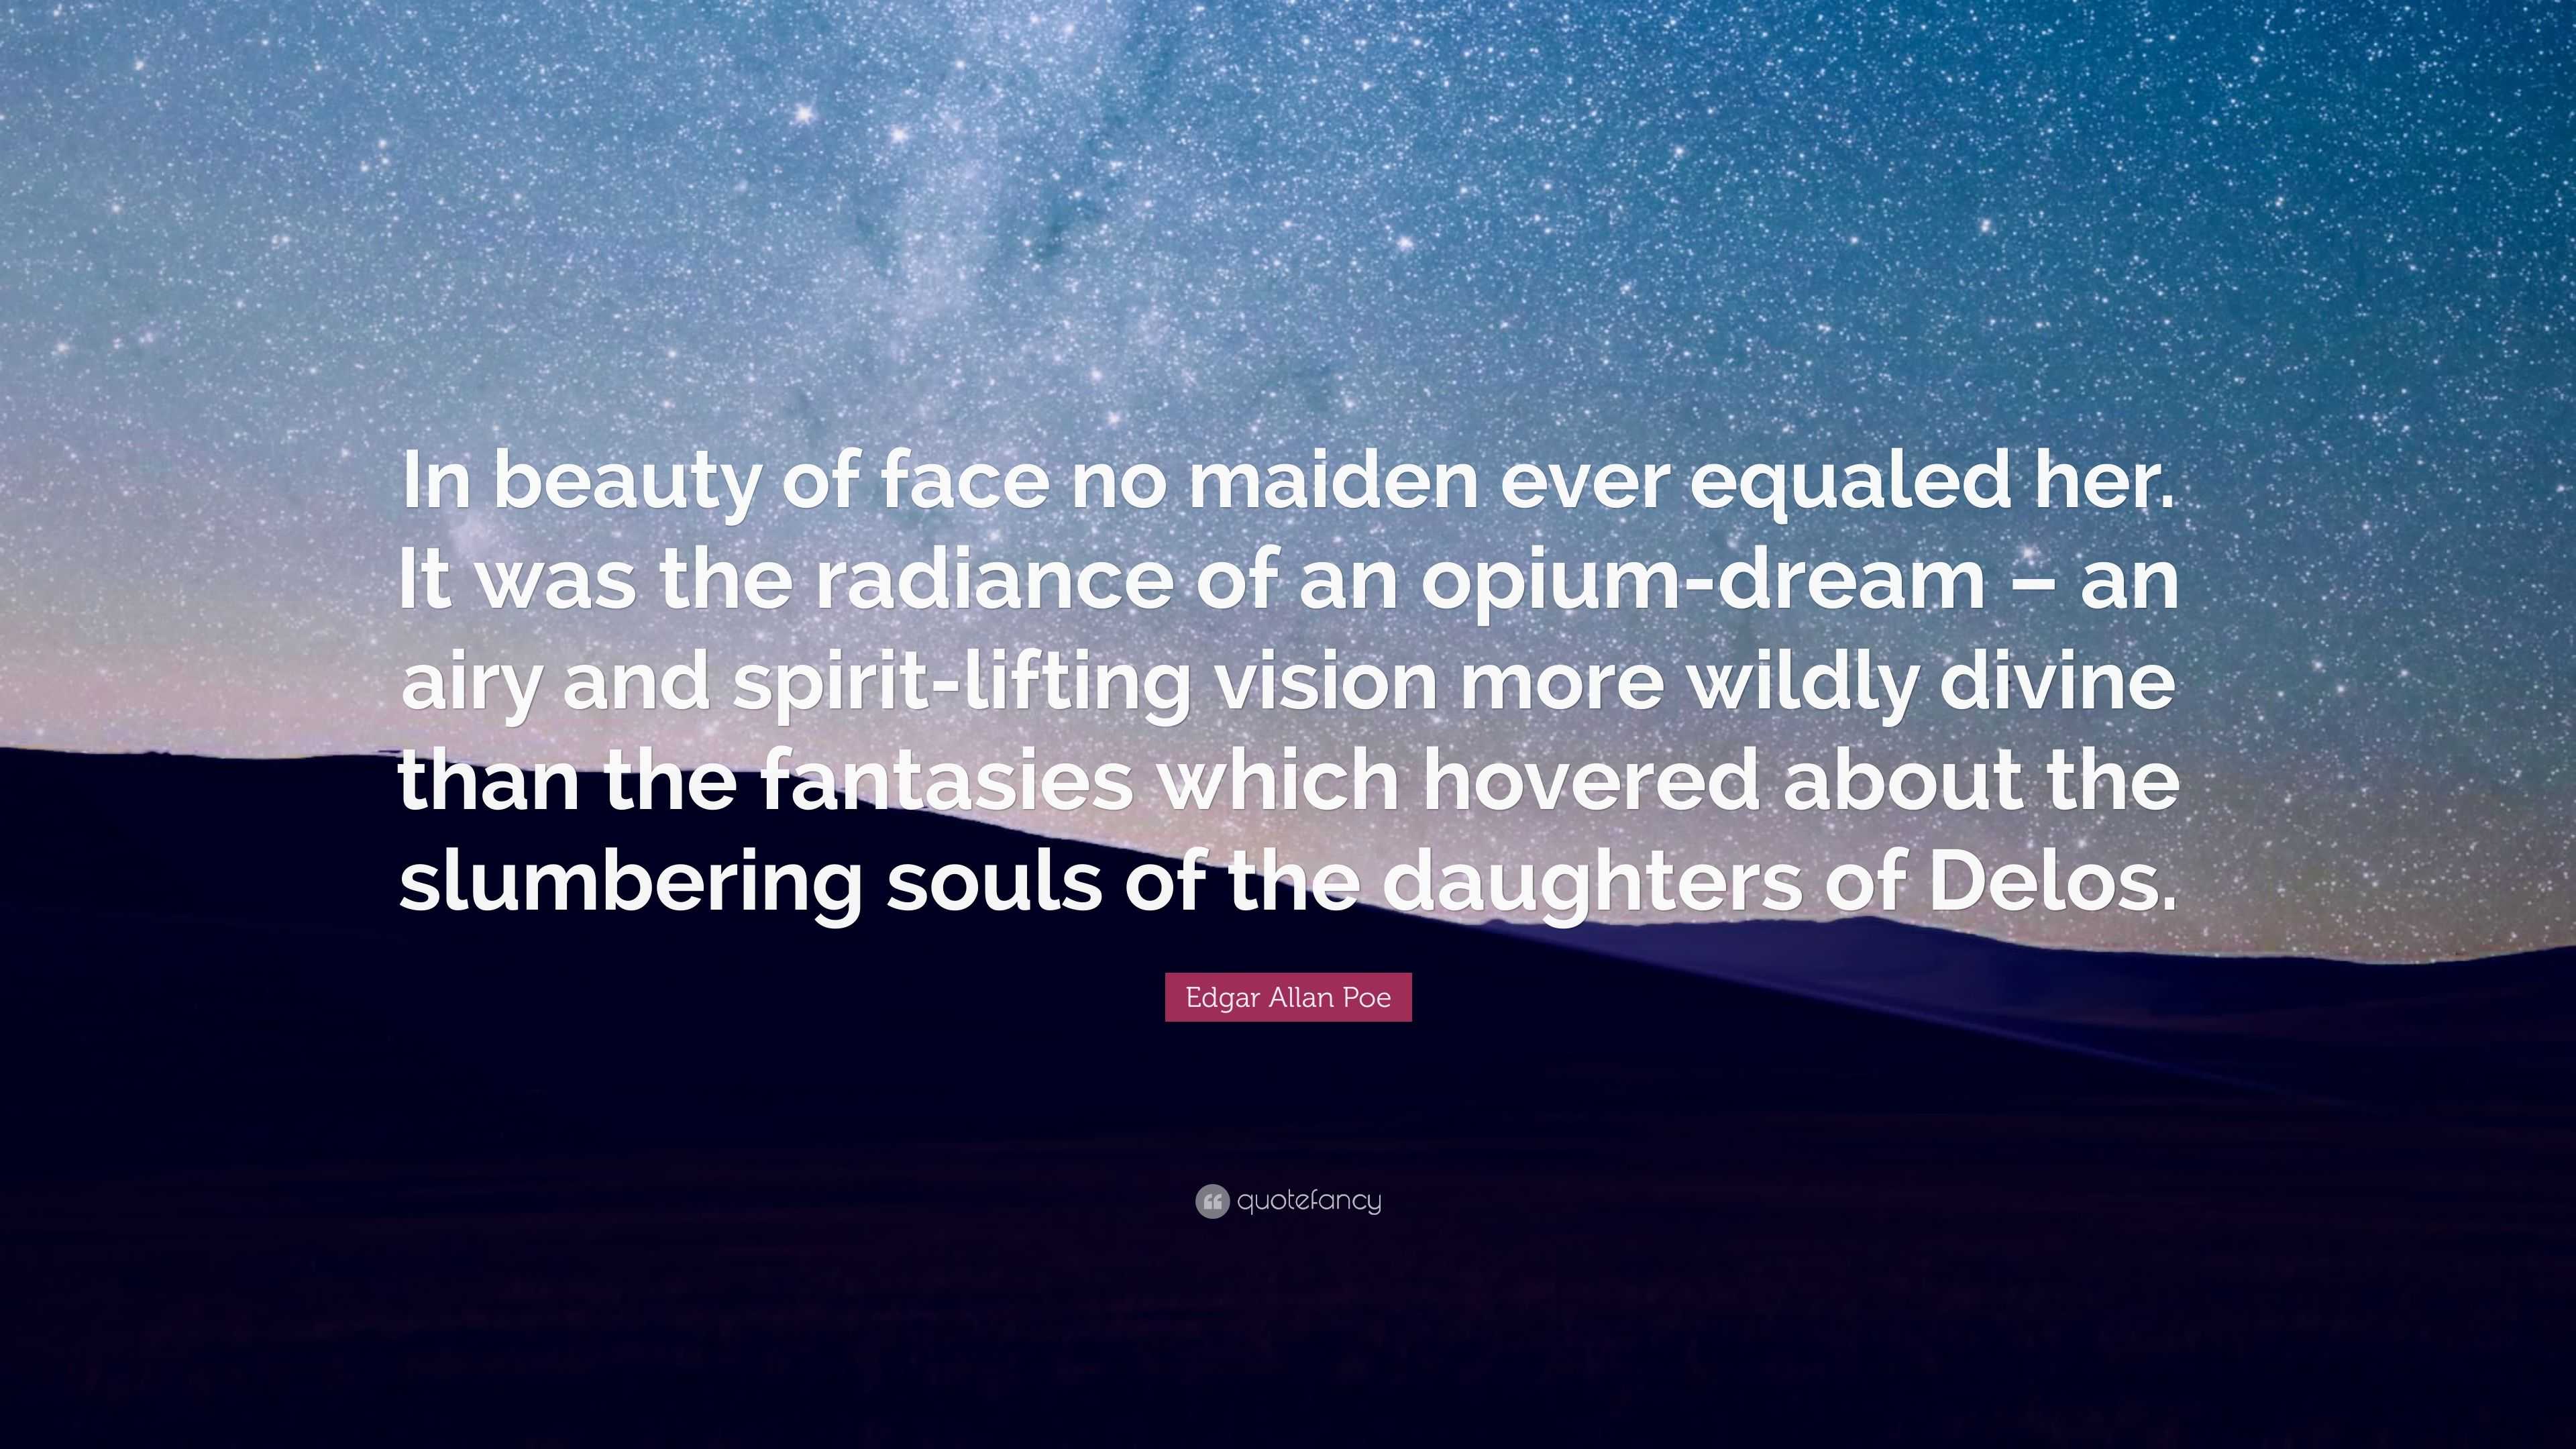 Edgar Allan Poe Quote: “In beauty of face no maiden ever equaled